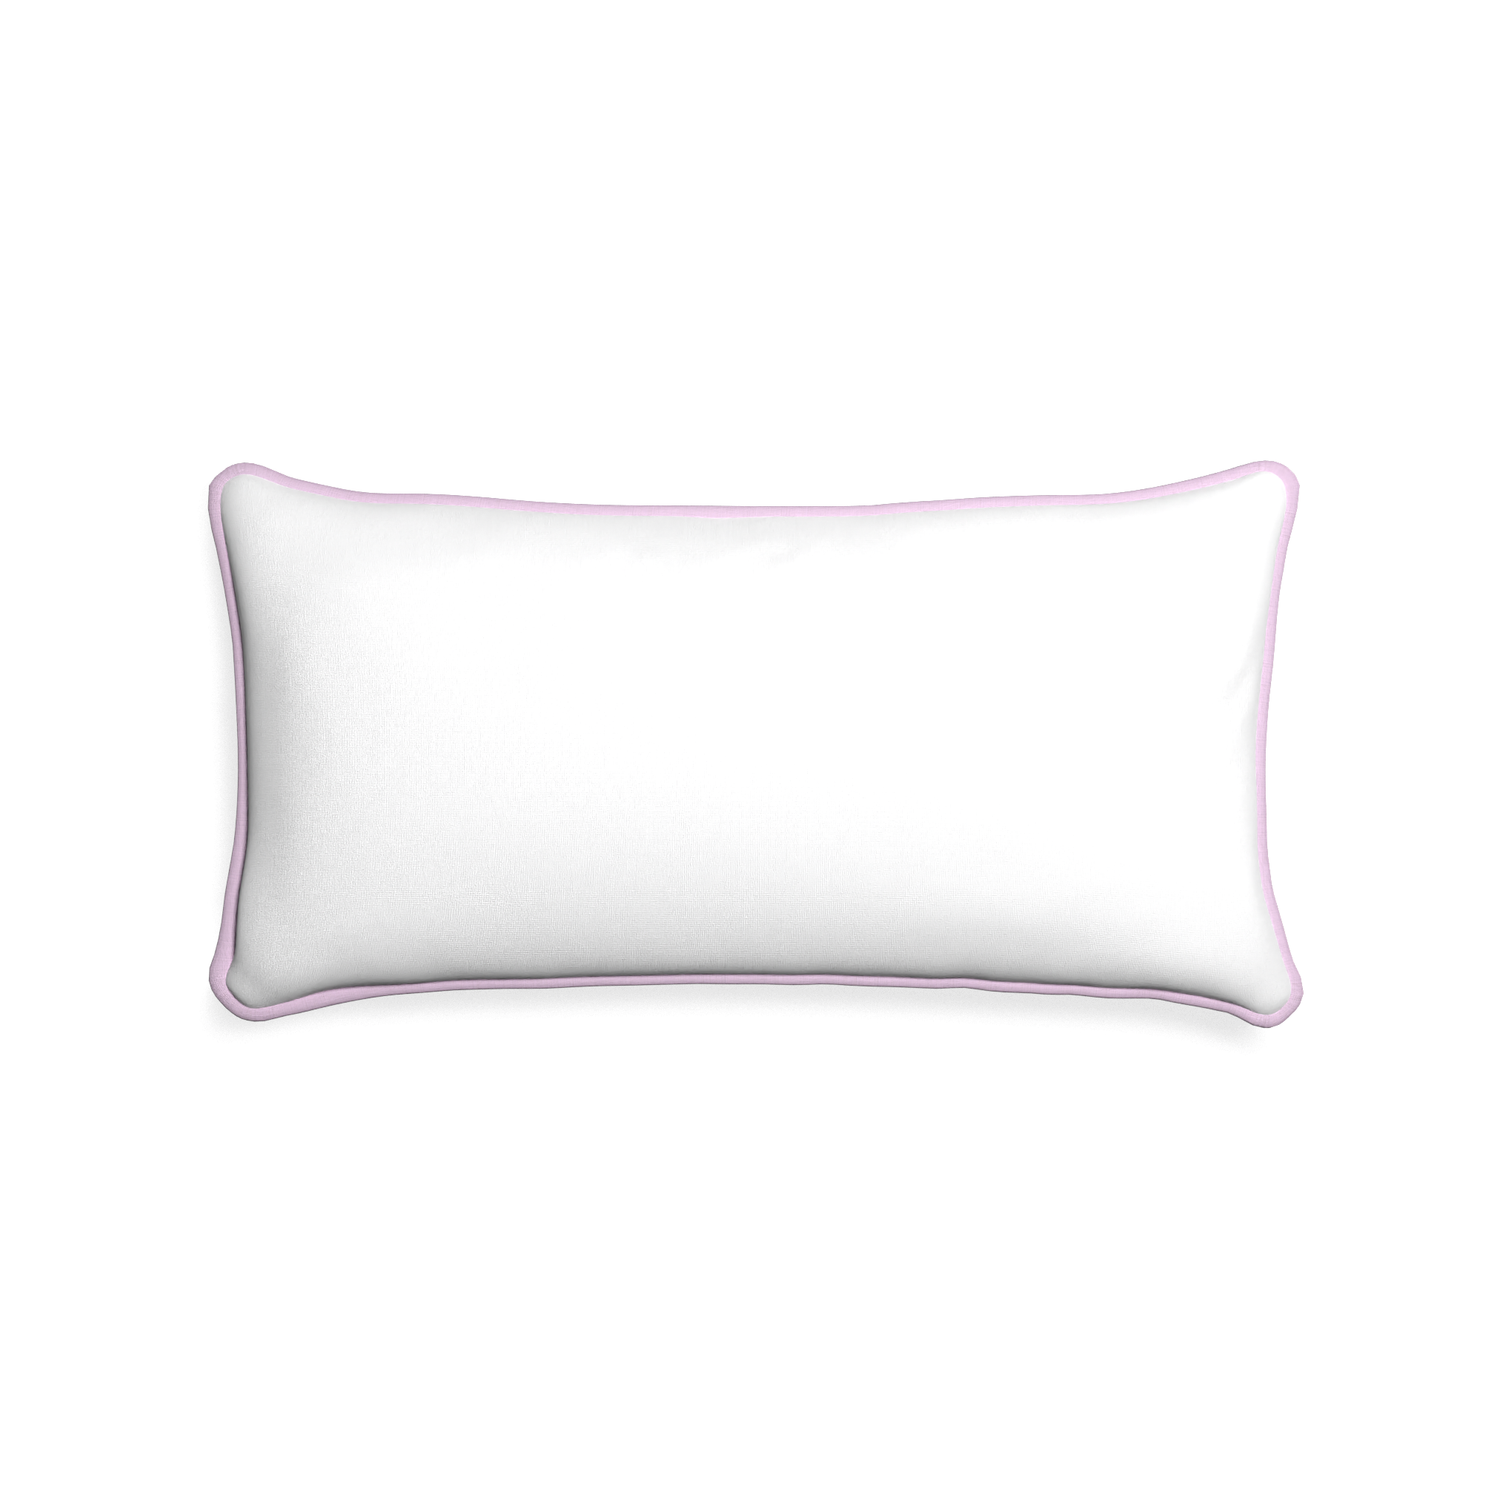 Midi-lumbar snow custom white cottonpillow with l piping on white background